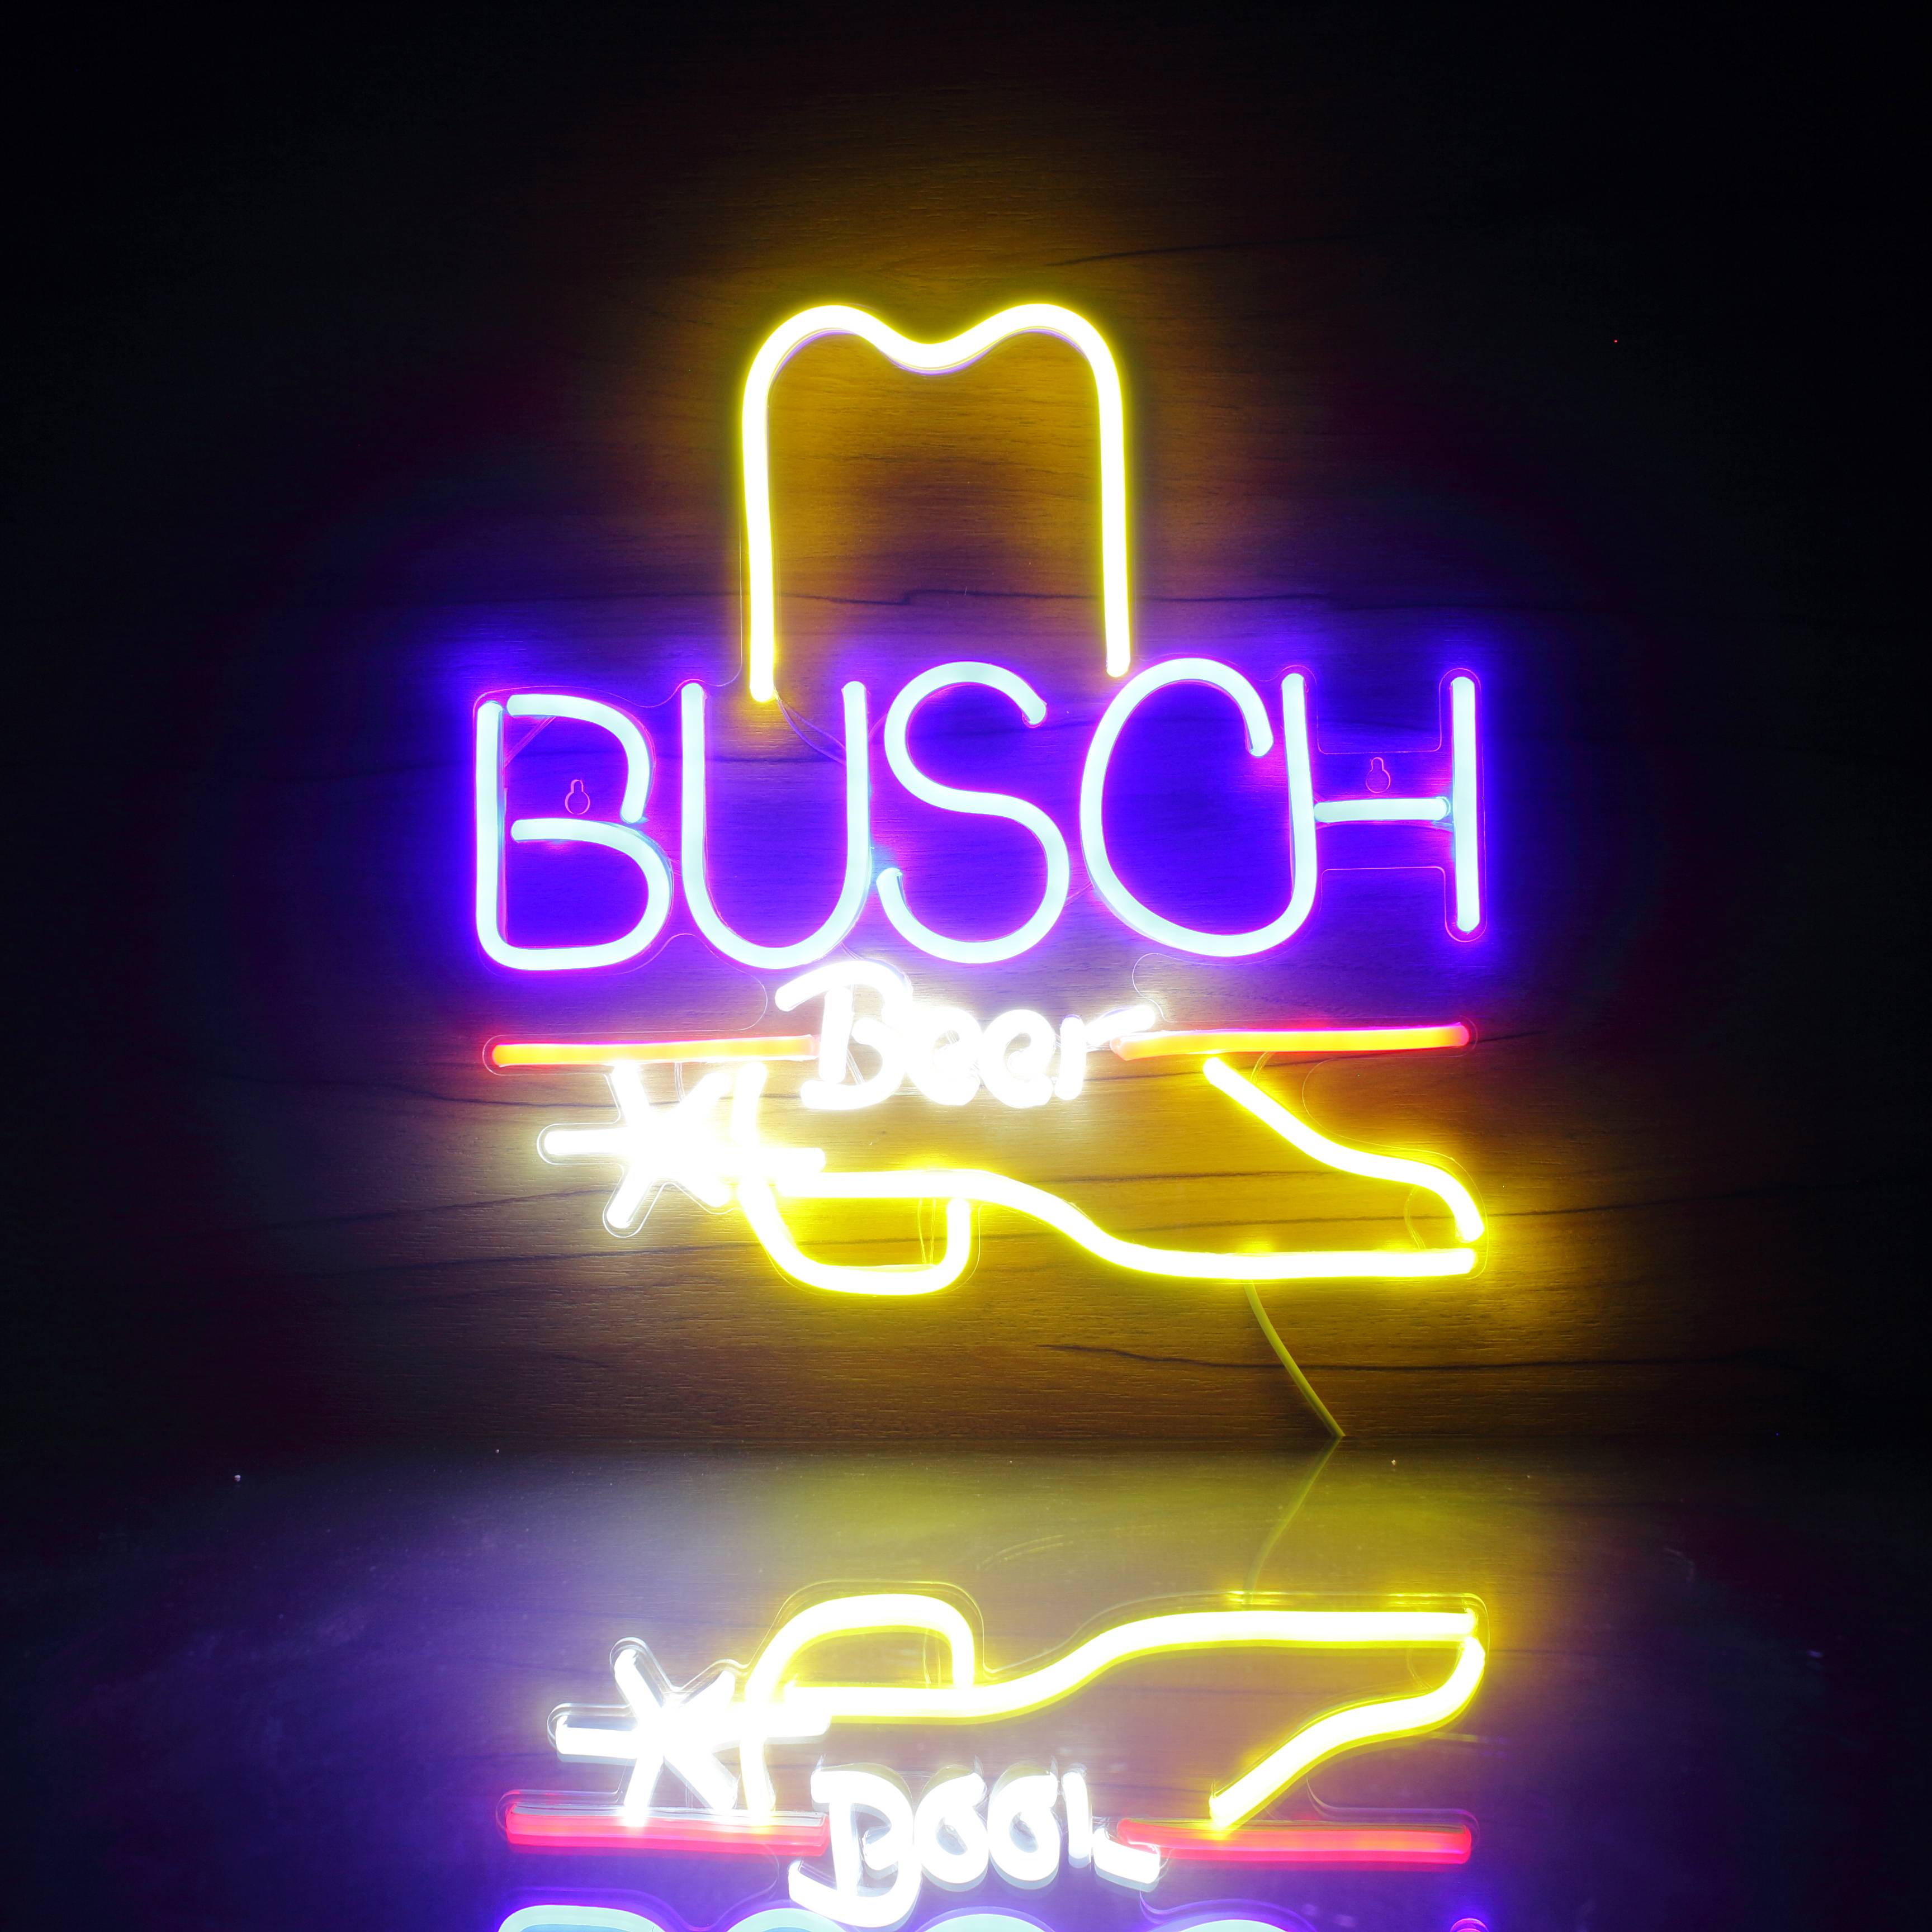 Busch Beer with Boot Handmade Neon Flex LED Sign